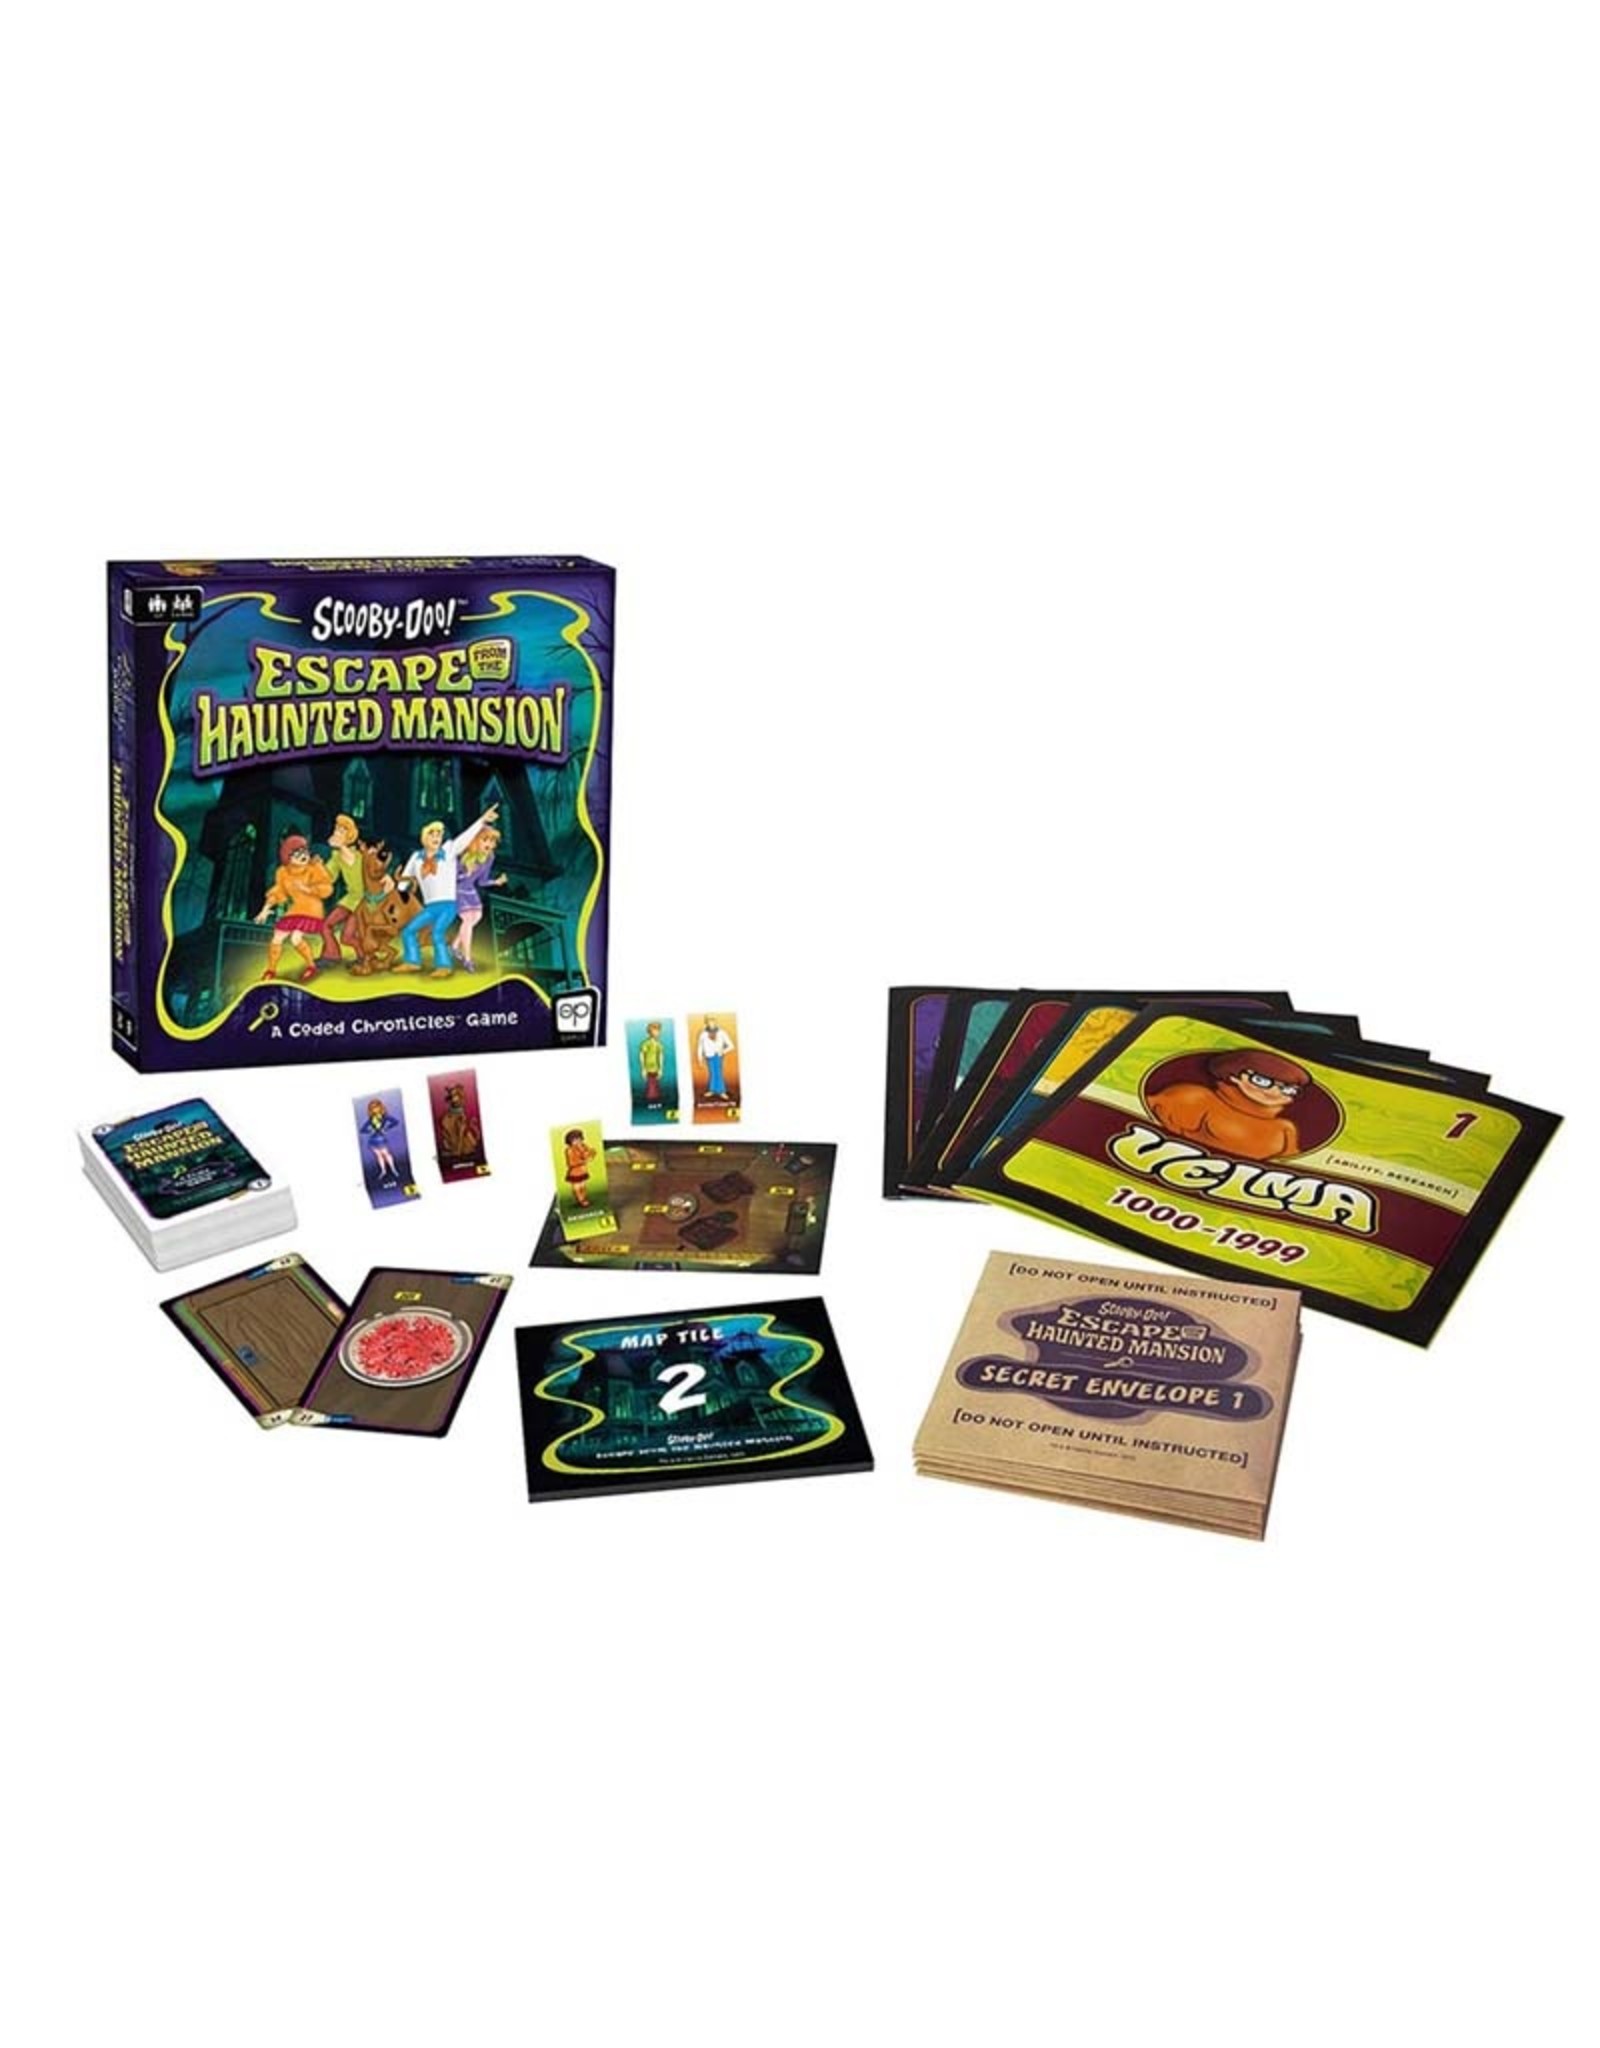 Usaopoly Scooby-Doo! Escape from the Haunted Mansion